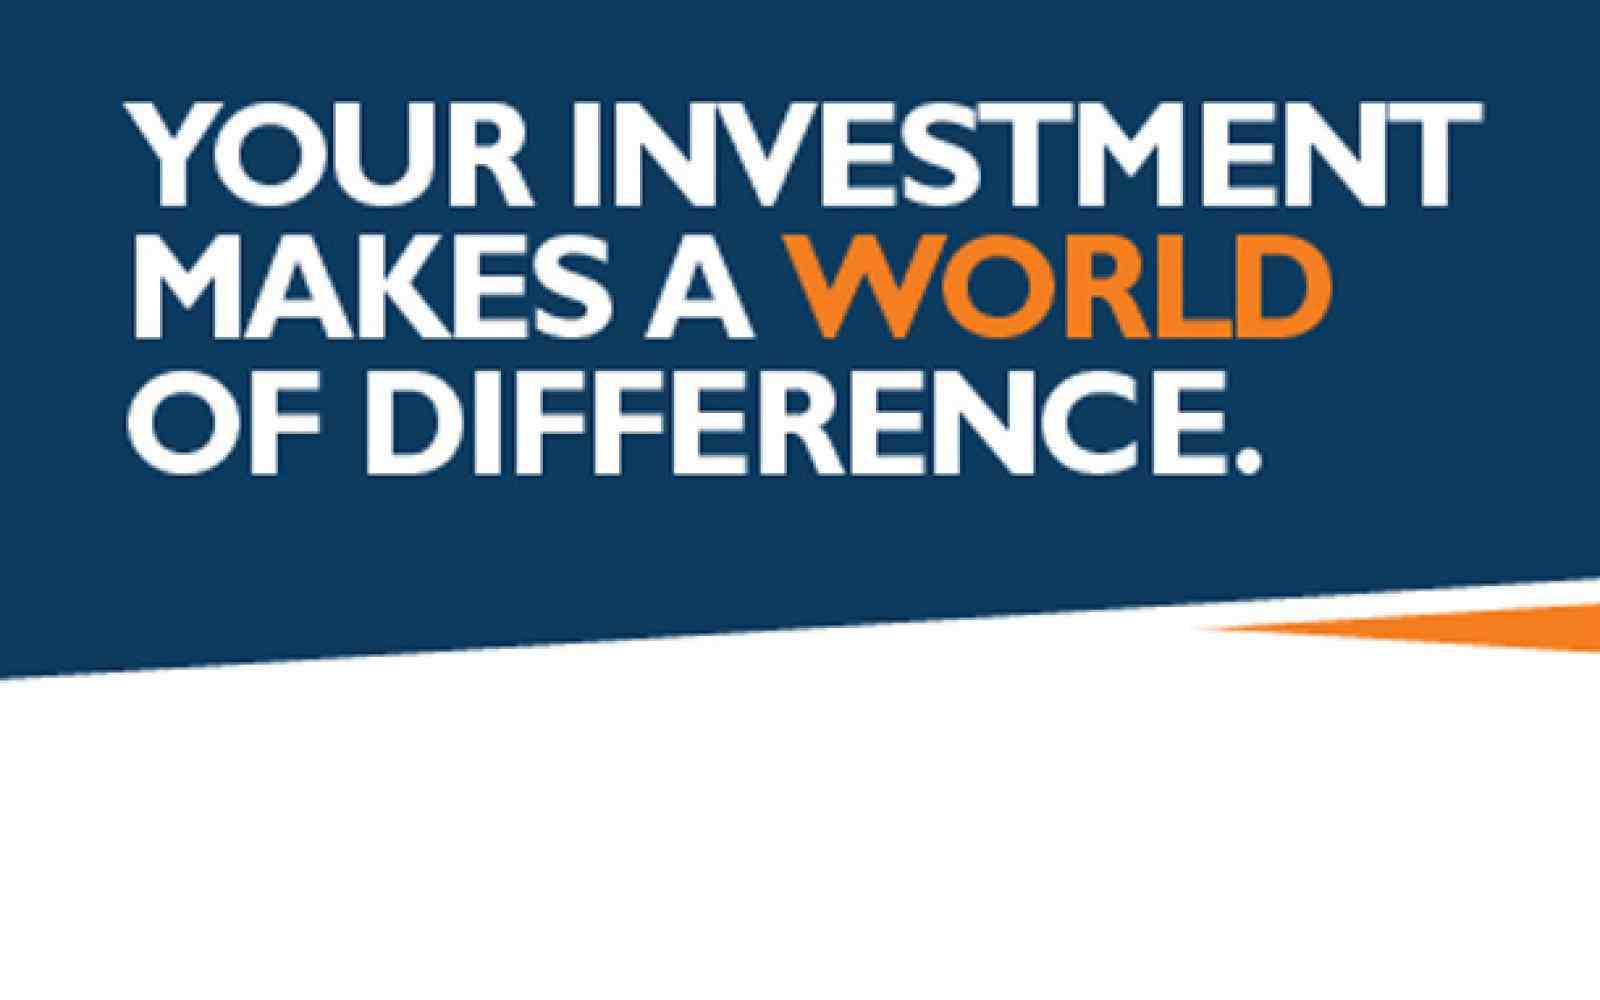 Your Investment Makes a World of Difference!